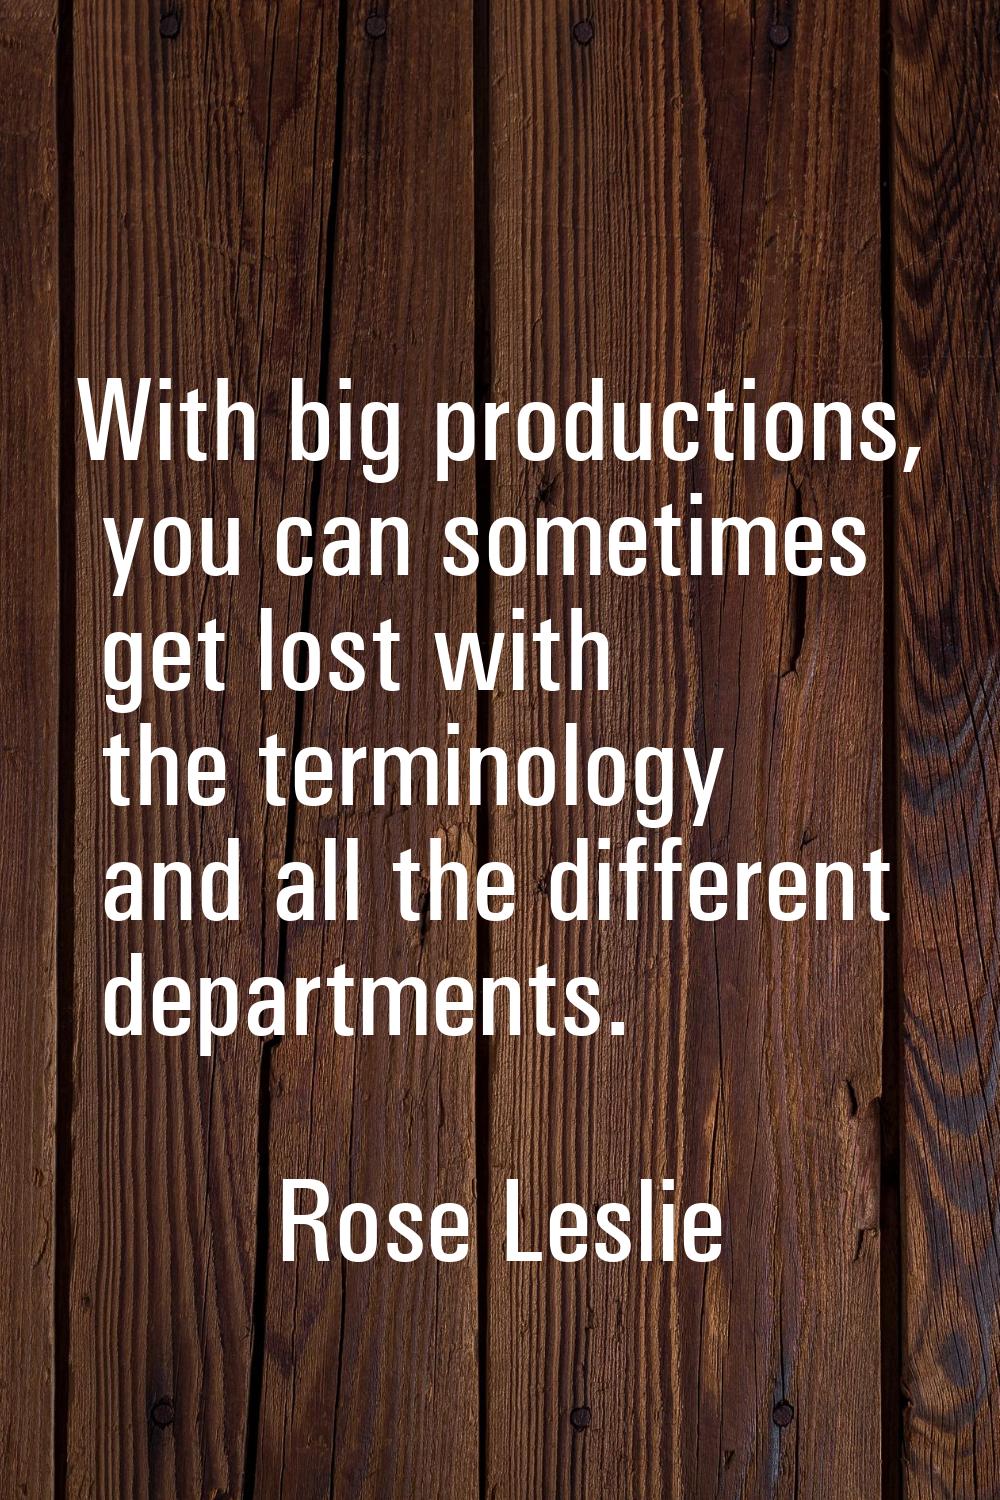 With big productions, you can sometimes get lost with the terminology and all the different departm